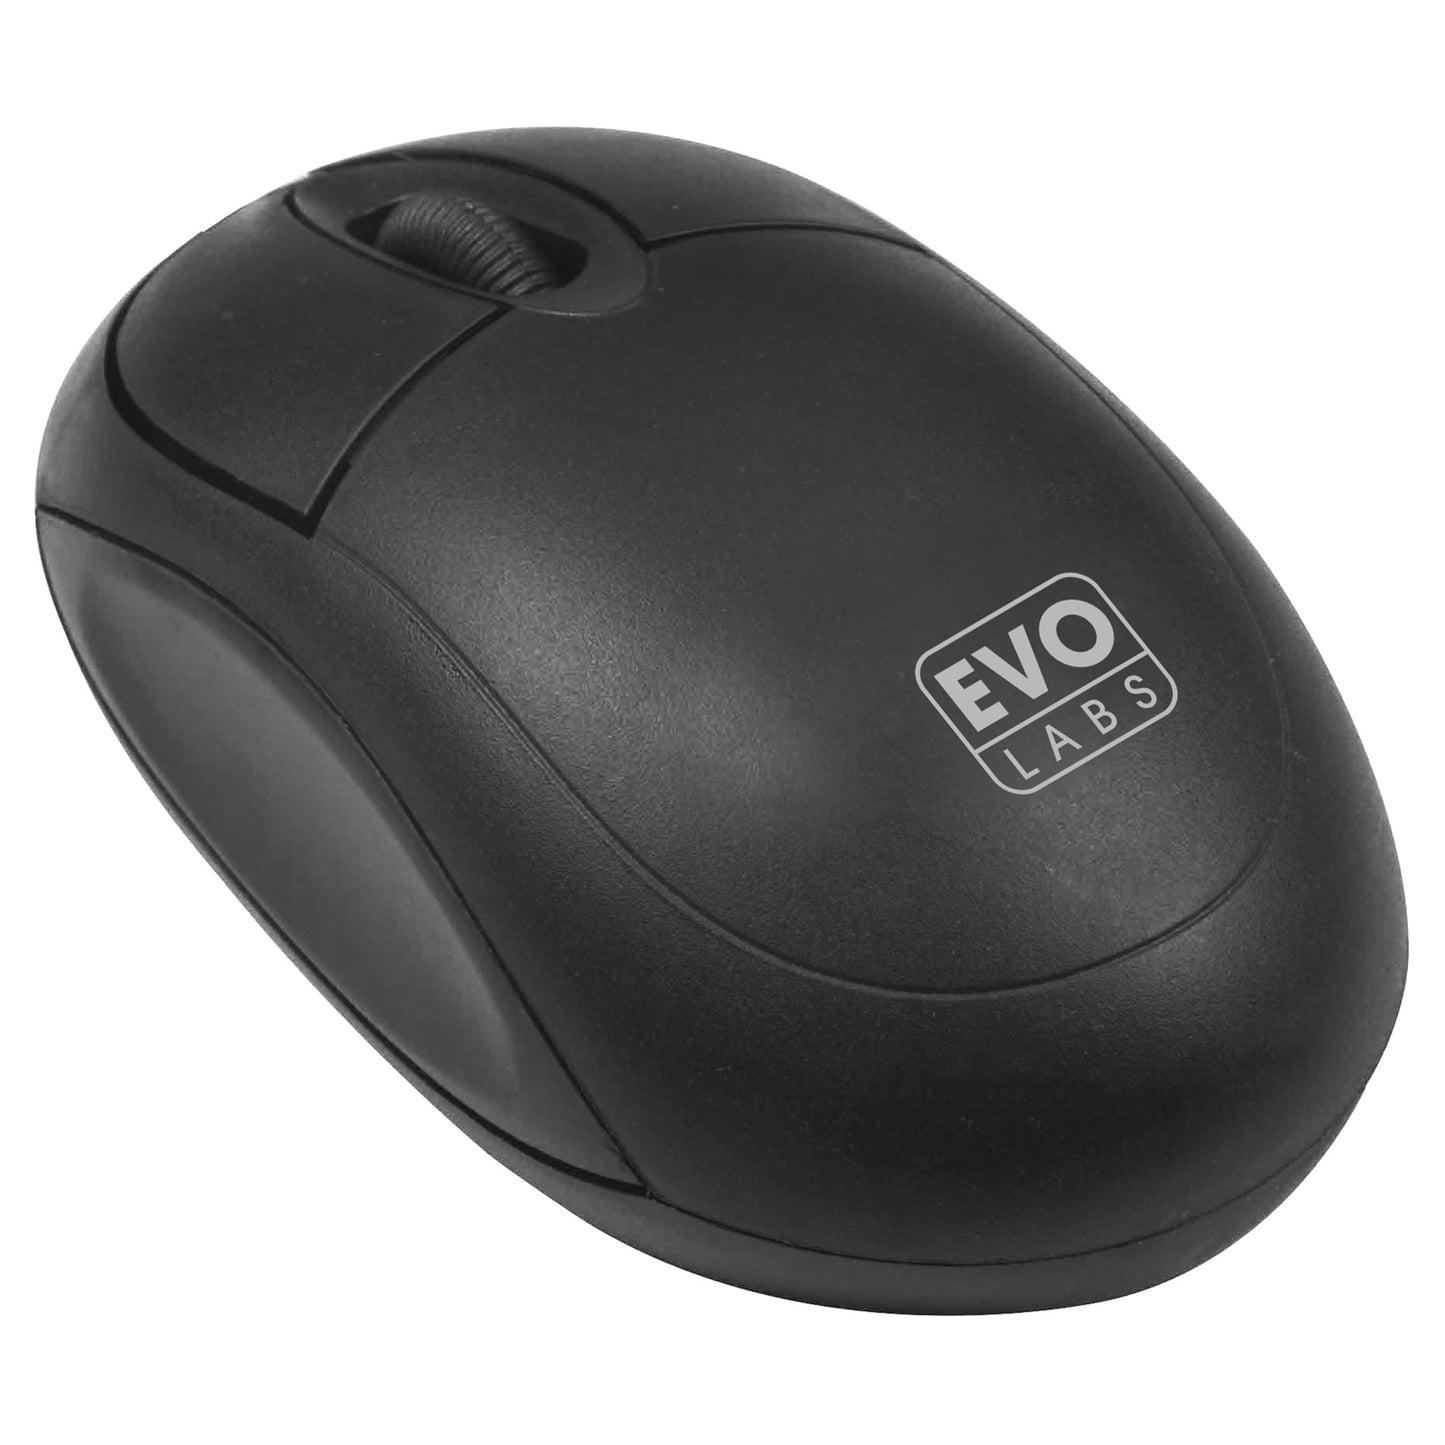 Evo Labs MO-001 Wired USB Mini Plug and Play Mouse, 800 DPI Optical Tracking, 3 Button with Scroll Wheel, Ambidextrous Design for PC / Mac / Laptop, Matte Black